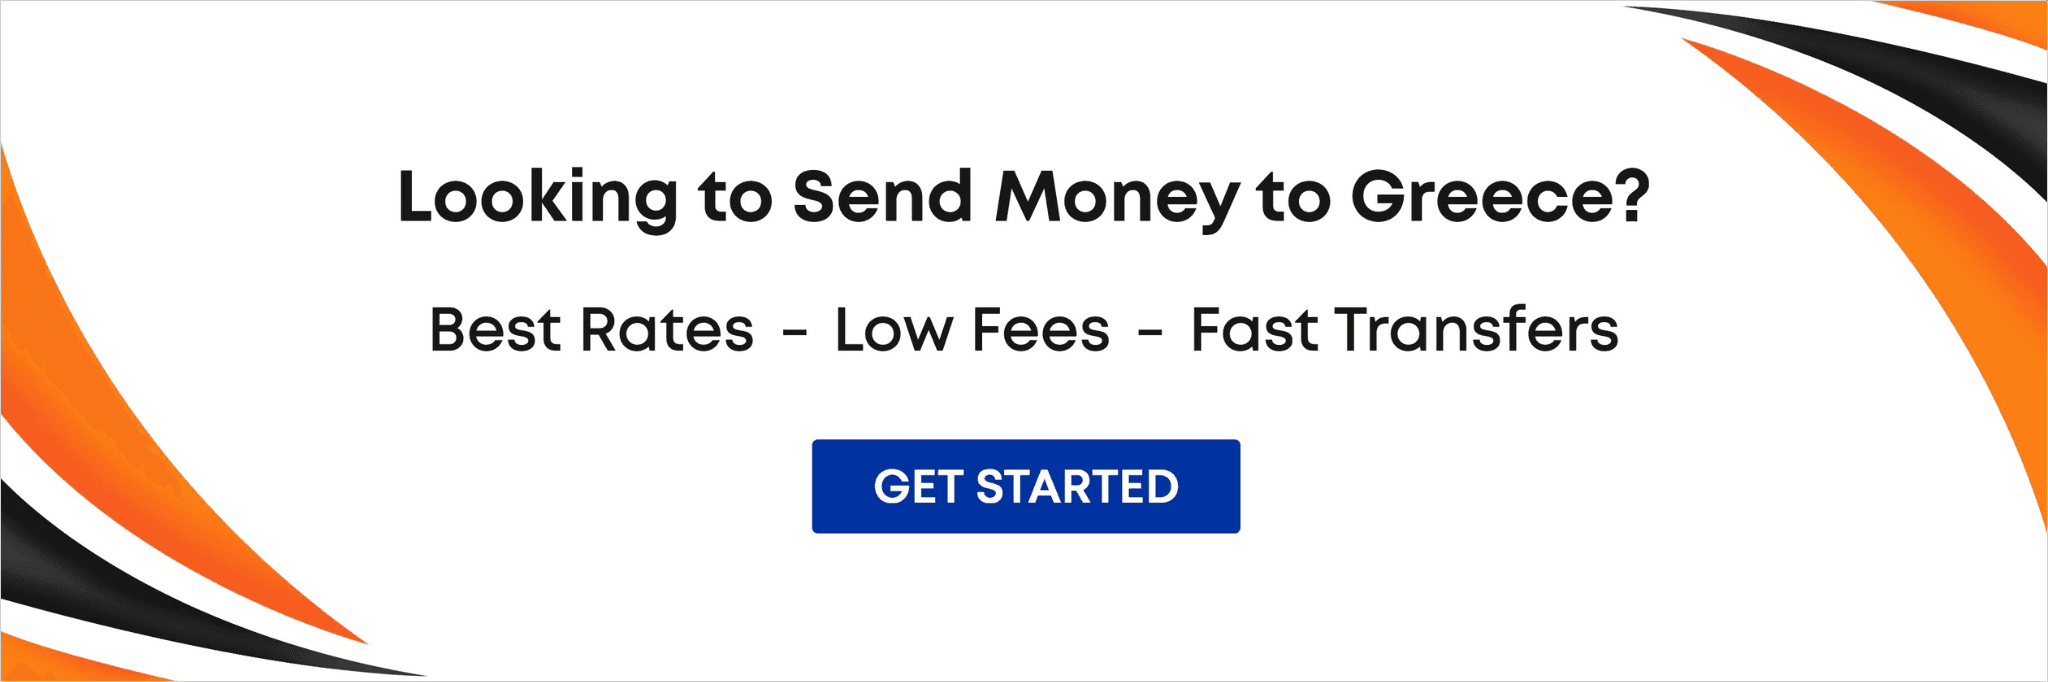 Looking to Send Money to Greece?